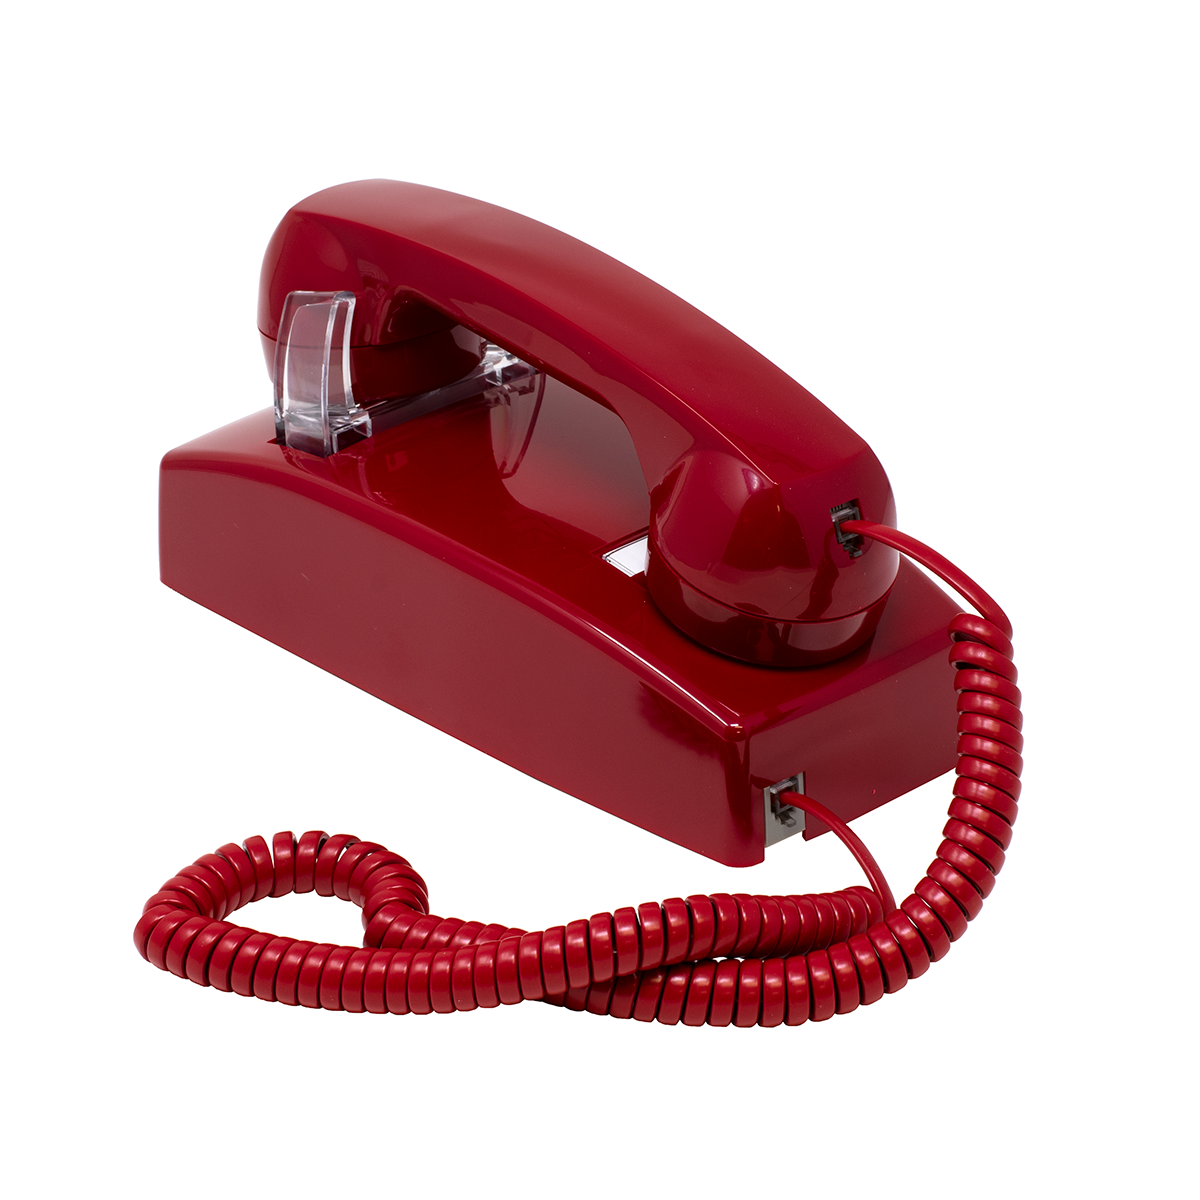 2554 Style Red Analog No-Dial Wall Phone